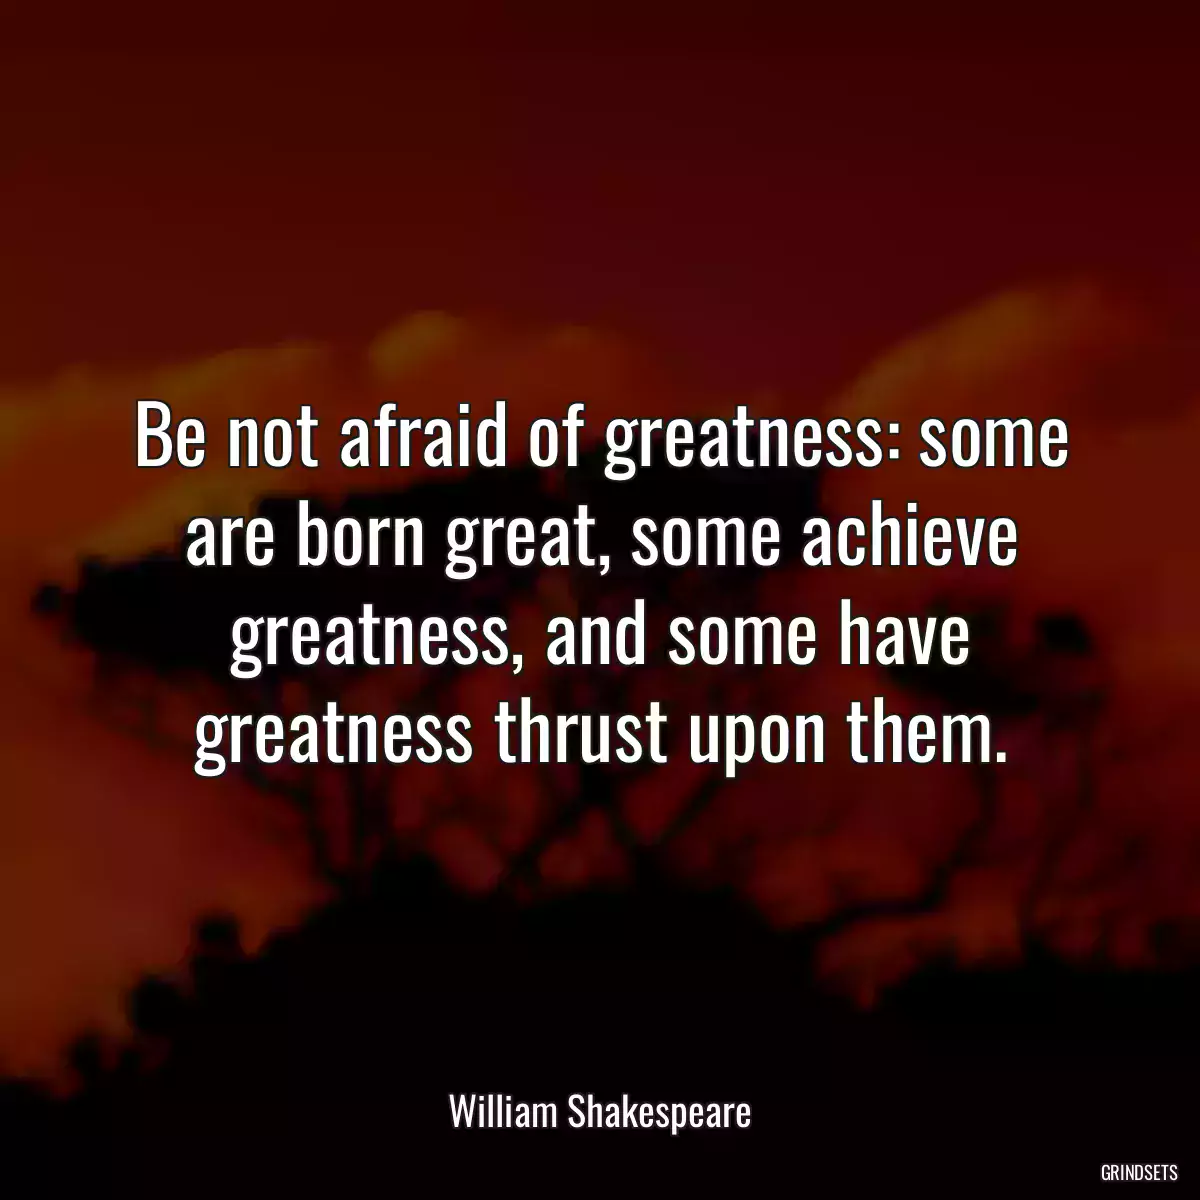 Be not afraid of greatness: some are born great, some achieve greatness, and some have greatness thrust upon them.